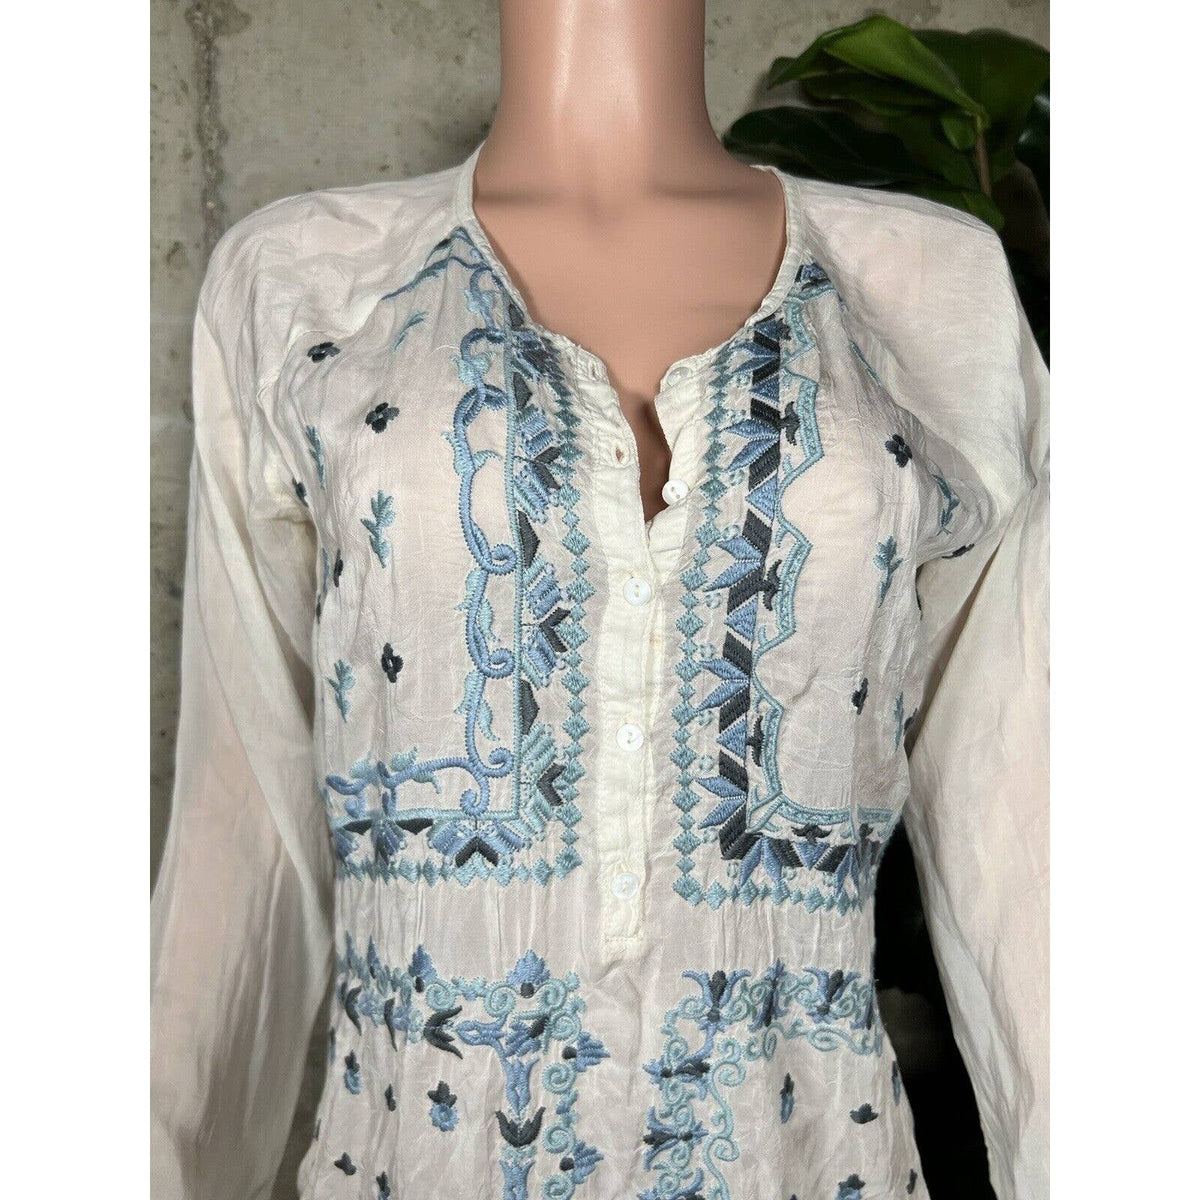 Johnny Was Ivory and Blue Embroidered Blouse Sz. XS